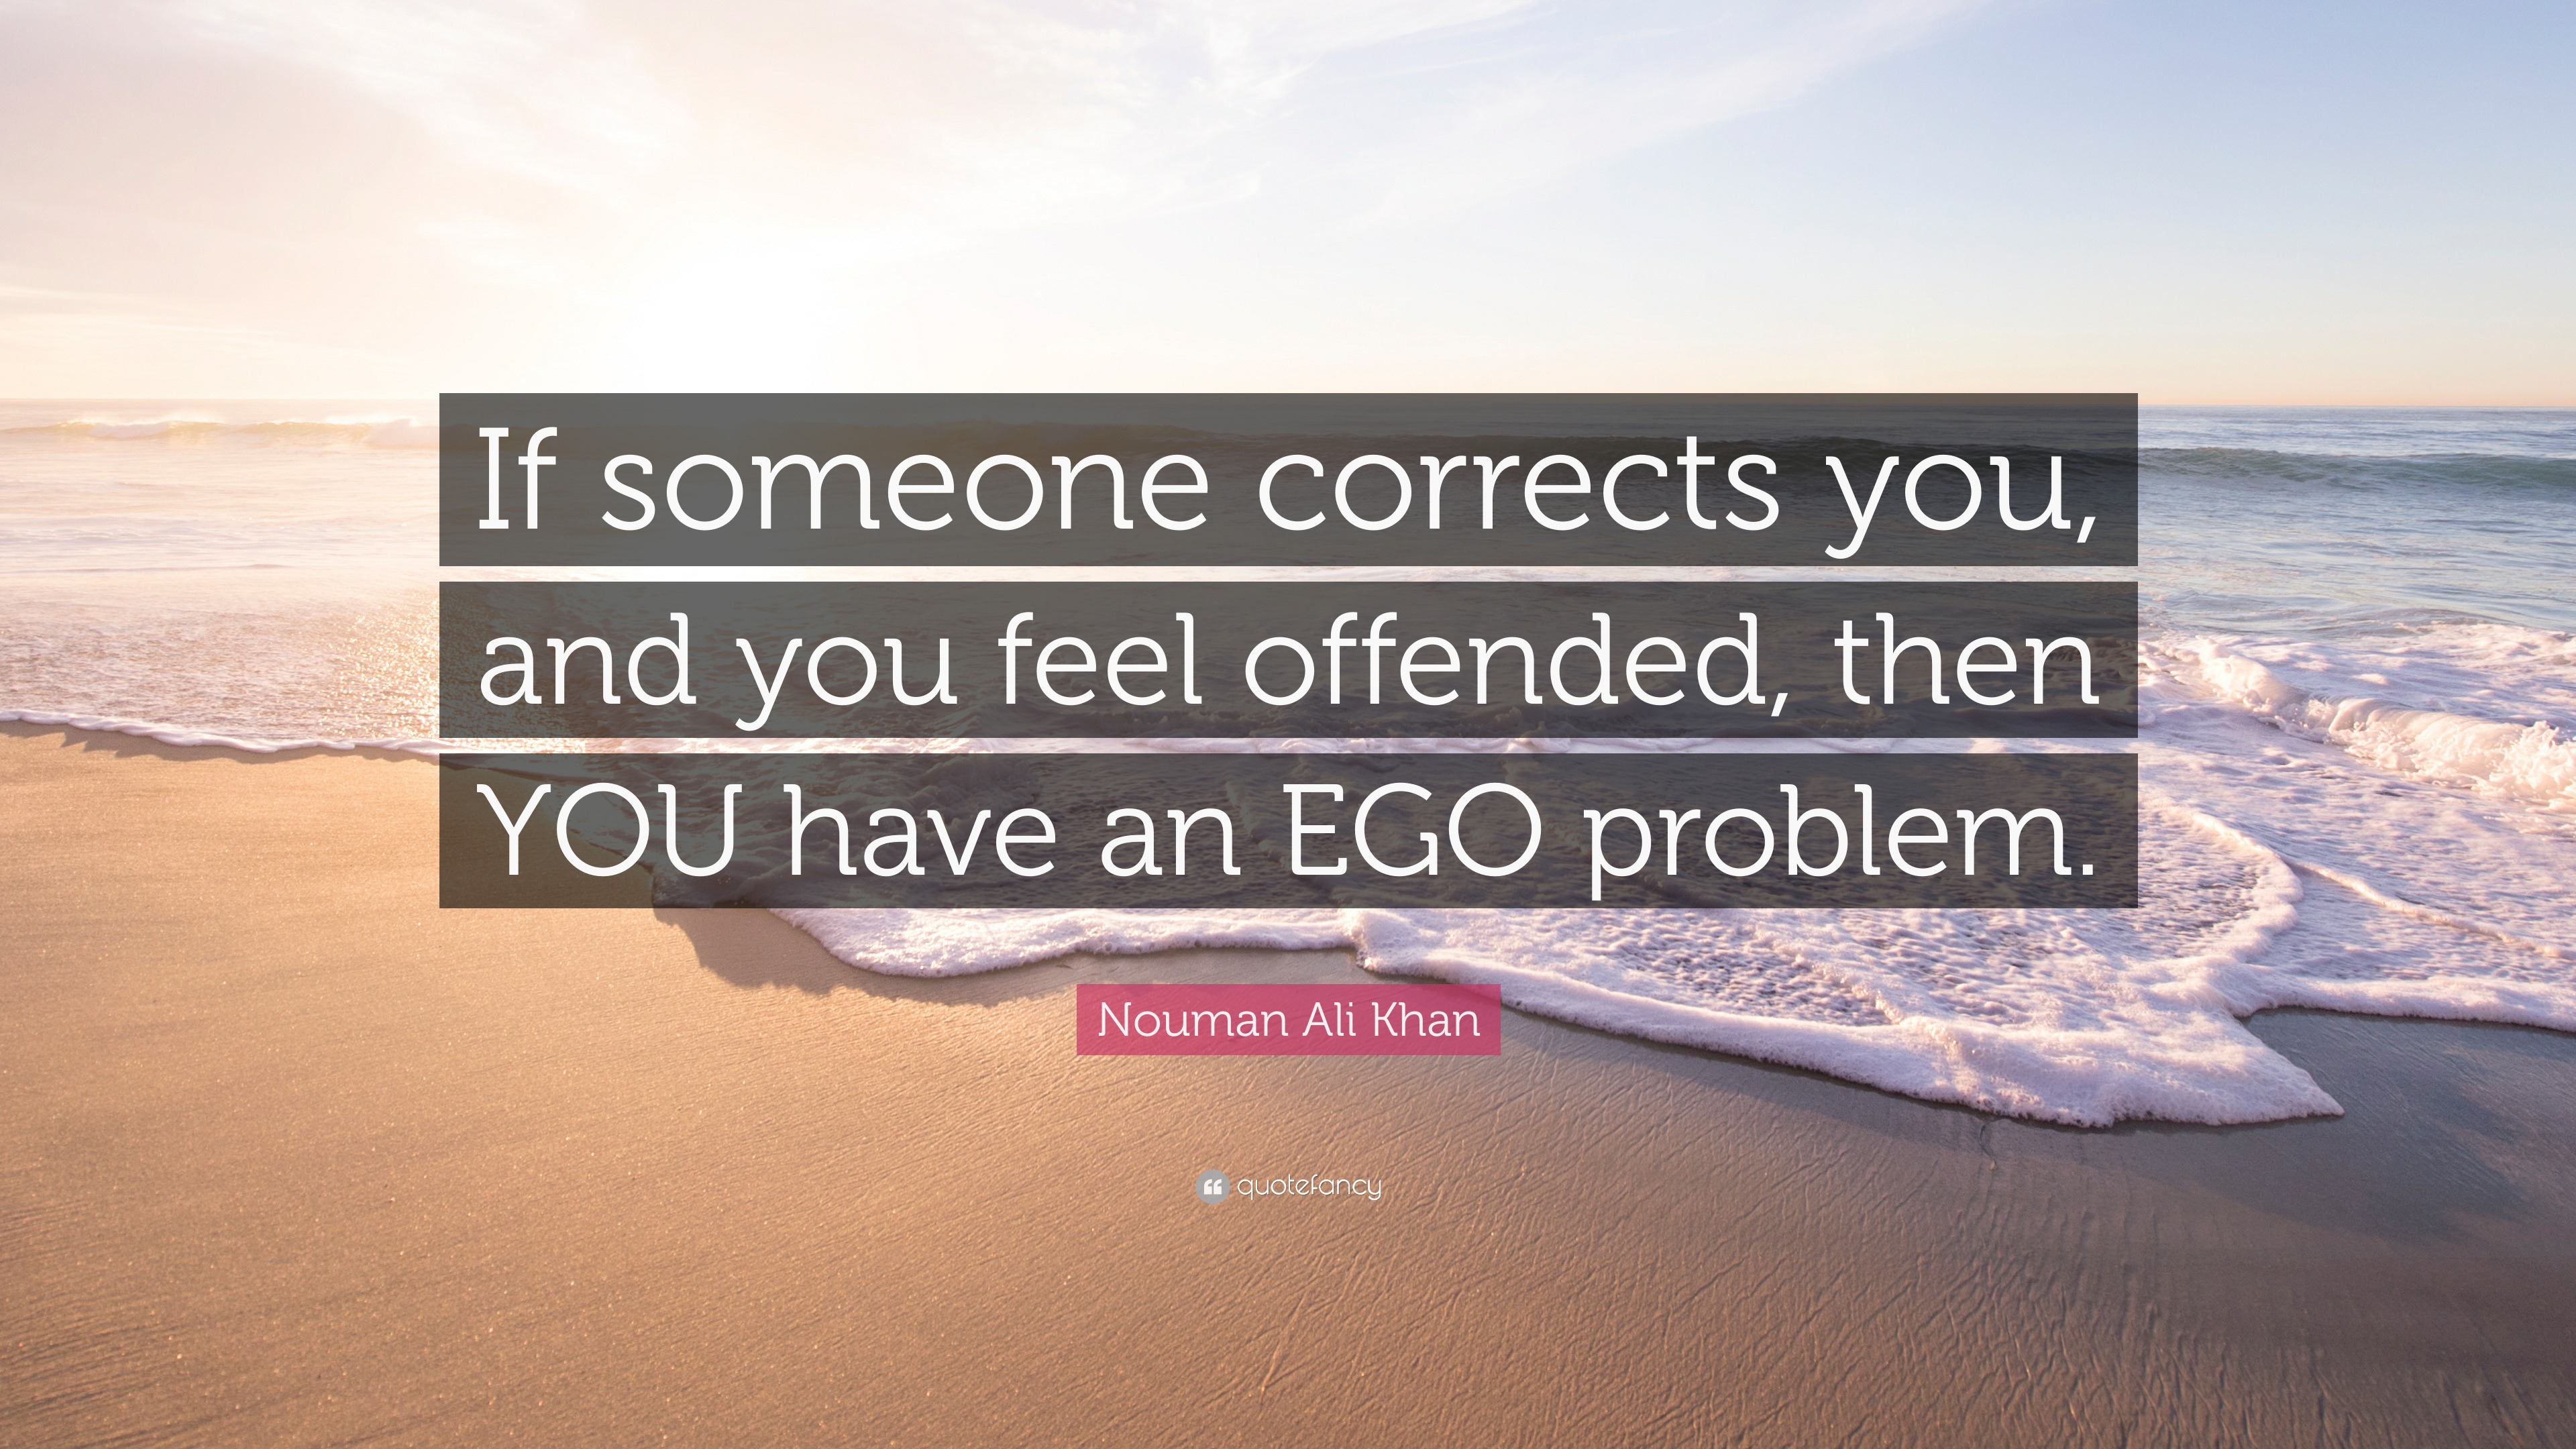 If someone corrects you, and you feel offended, then YOU have an EGO proble...